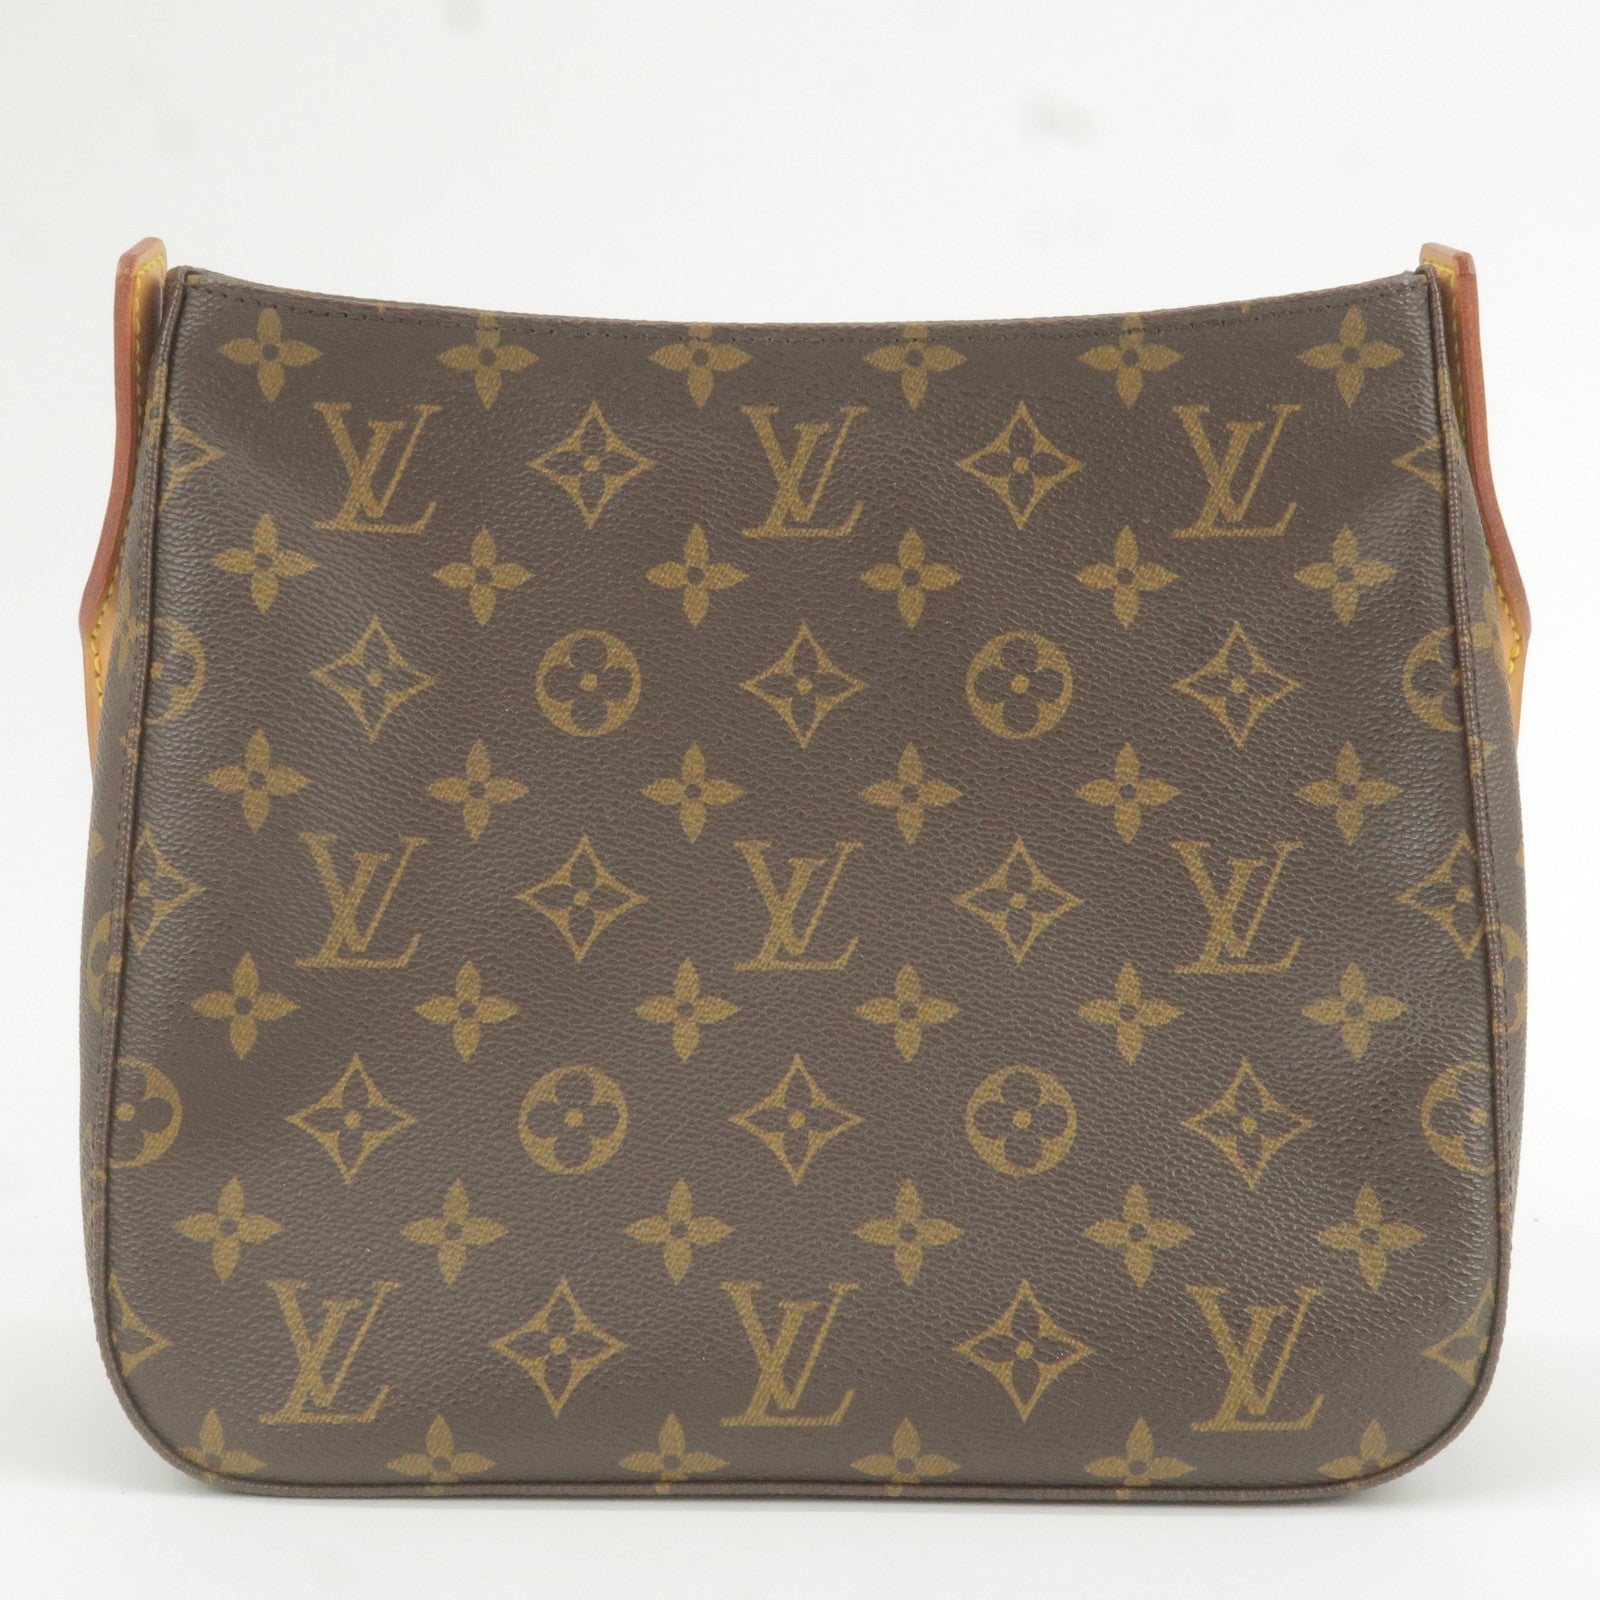 Kanye West x Louis Vuitton Packaging - Detailed Images